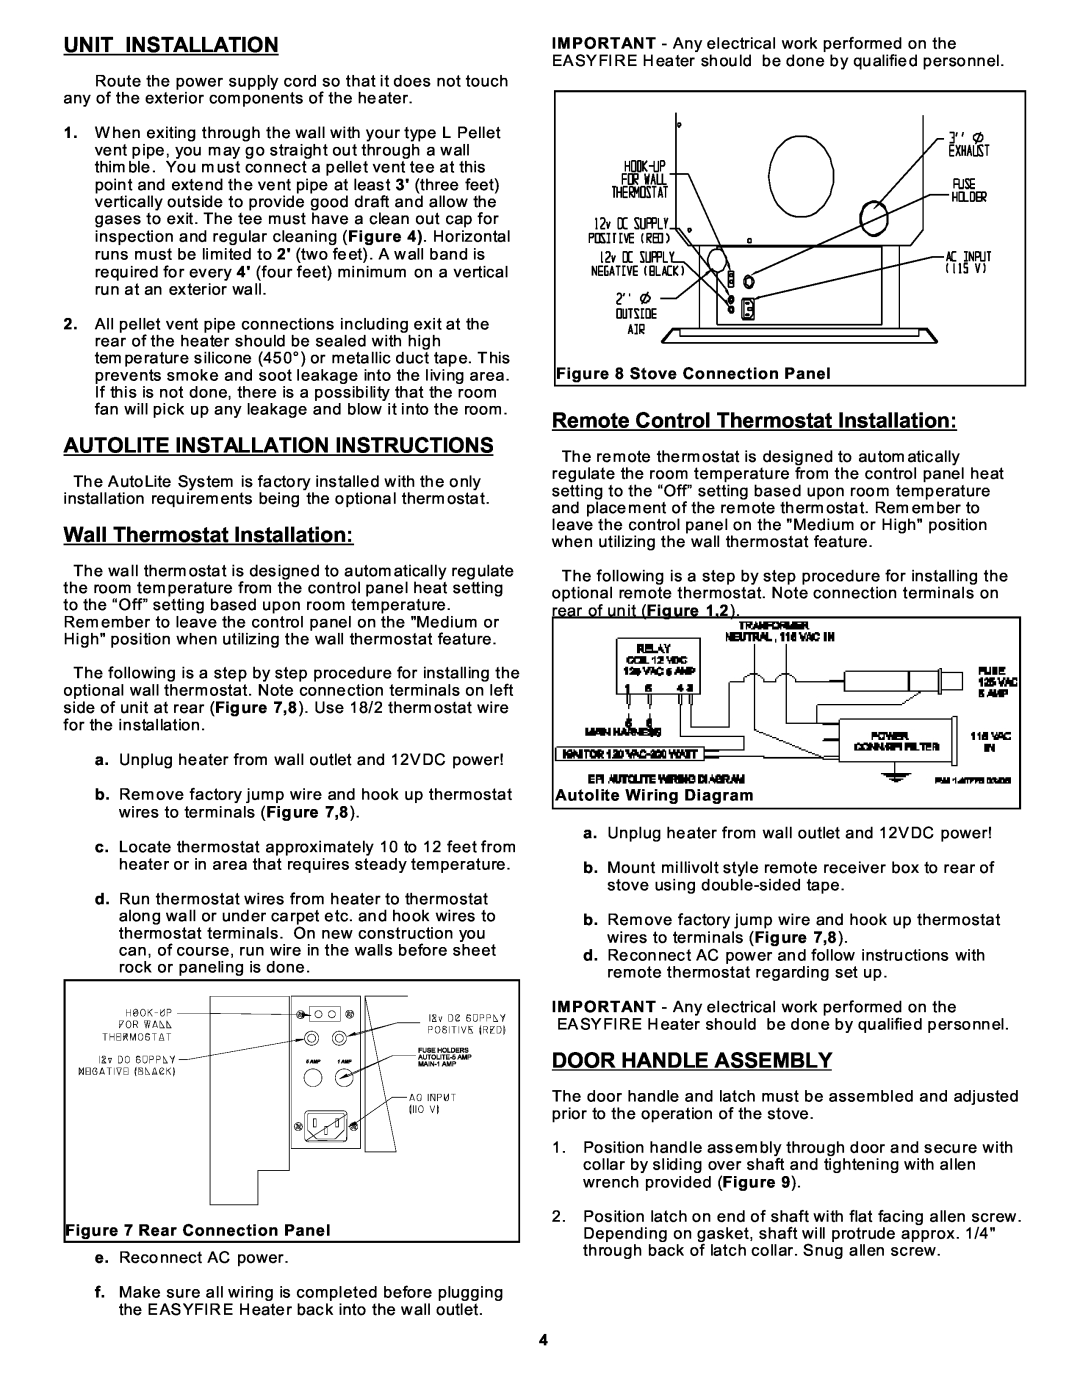 Sierra Products EF-5001UB owner manual Unit Installation, Autolite Installation Instructions, Wall Thermostat Installation 